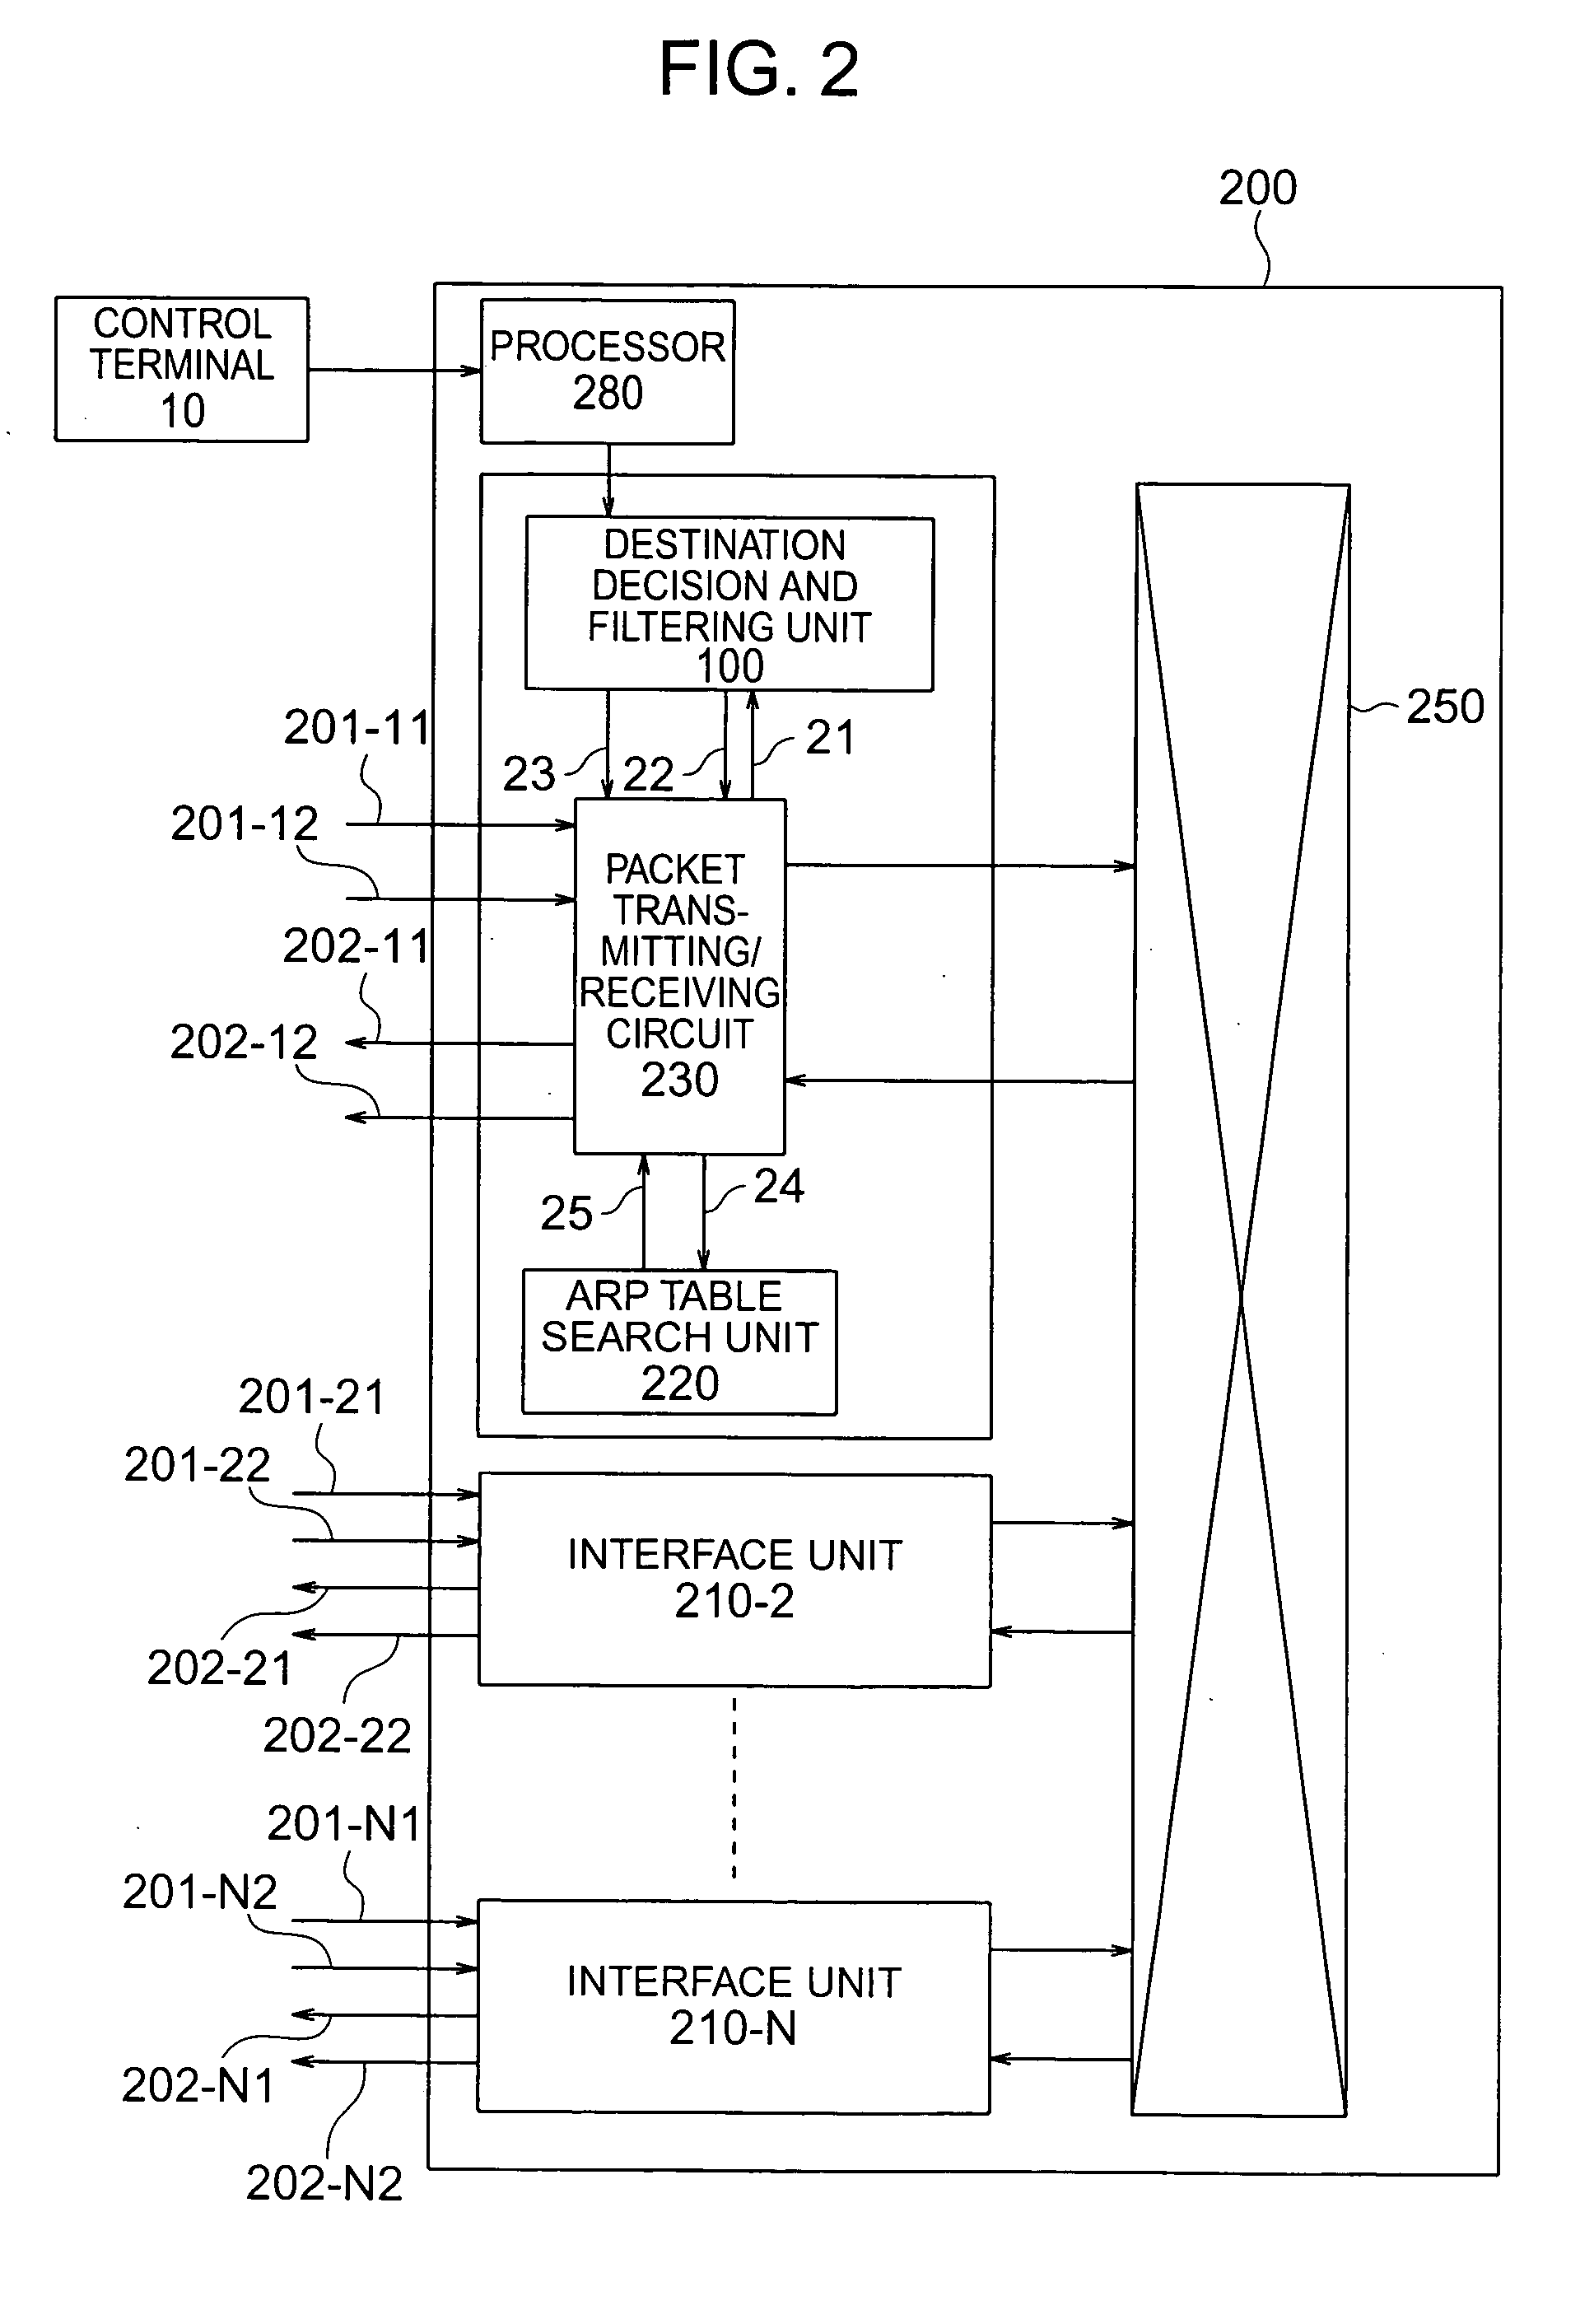 Packet forwarding device with packet filter